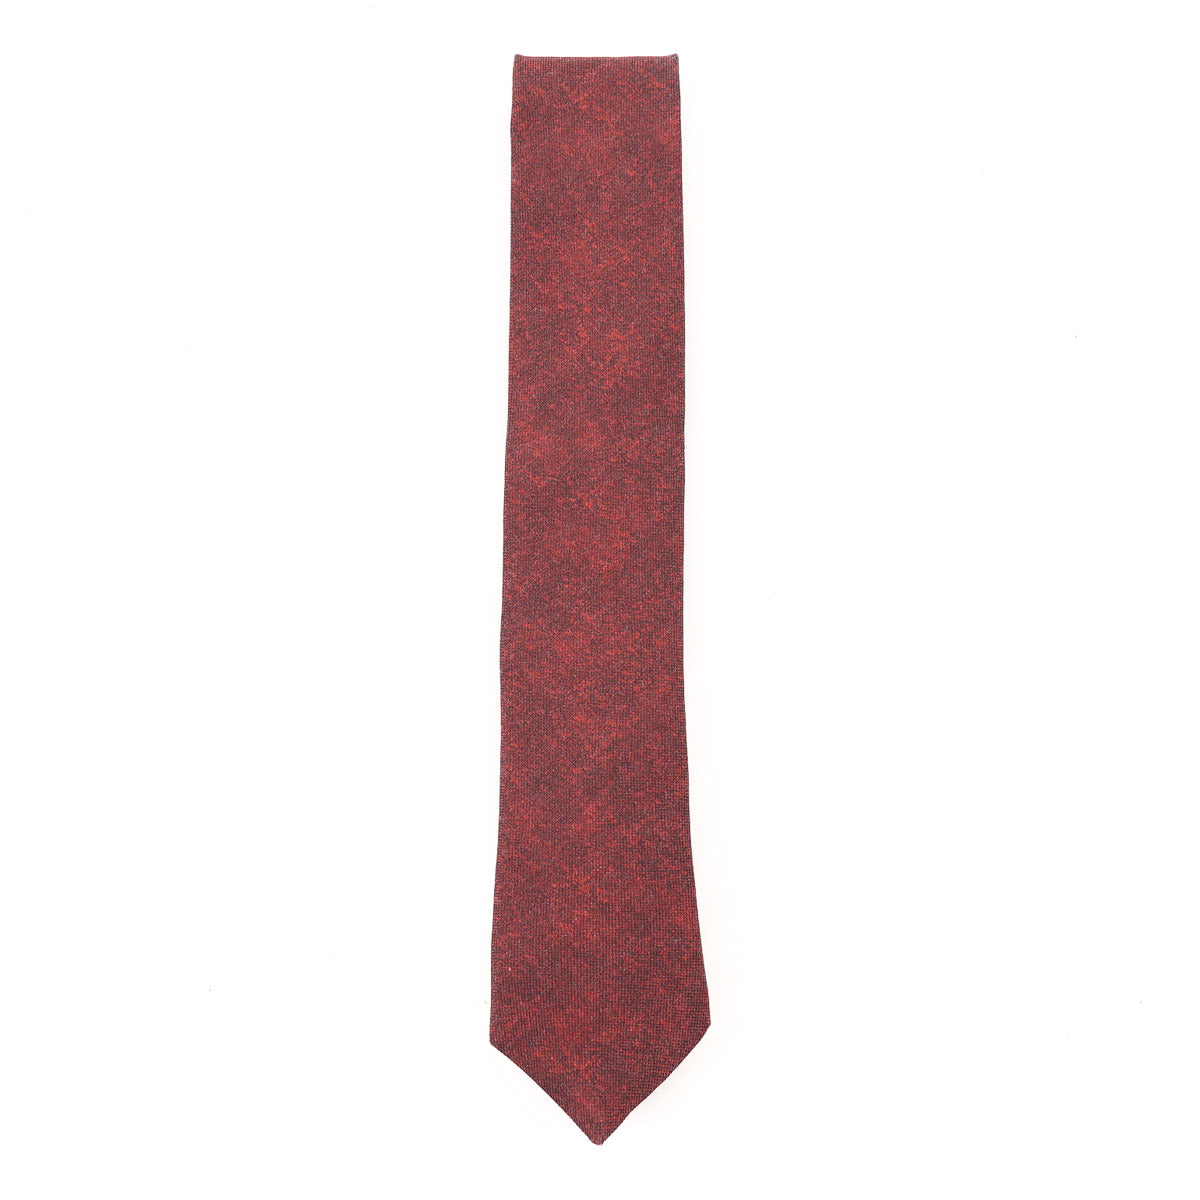 Isaia Soft-Woven Wool and Silk Tie - Top Shelf Apparel